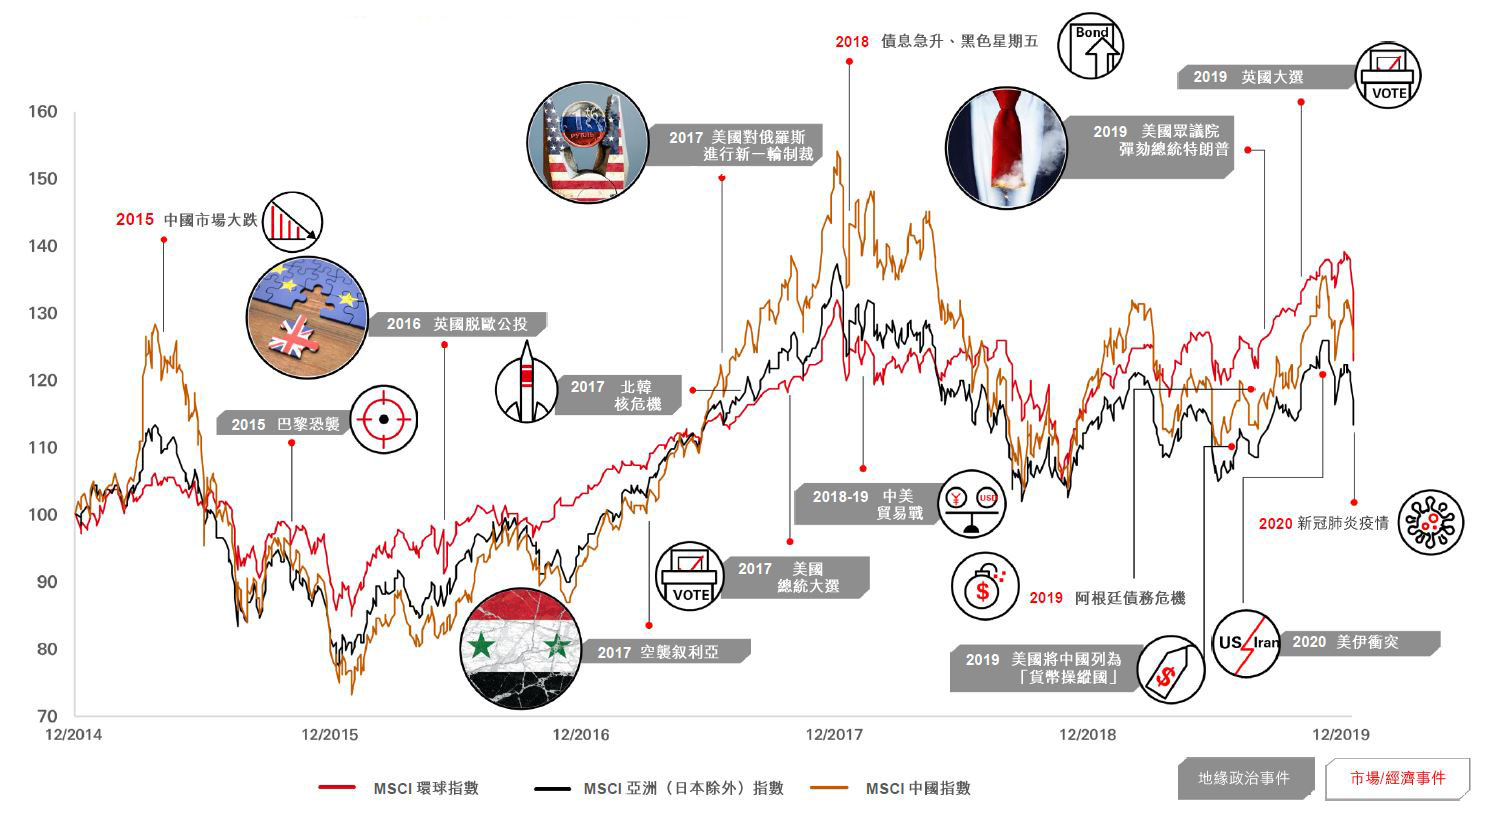 As shown by historical market performance, the impact of geopolitics on markets is usually short-lived
            